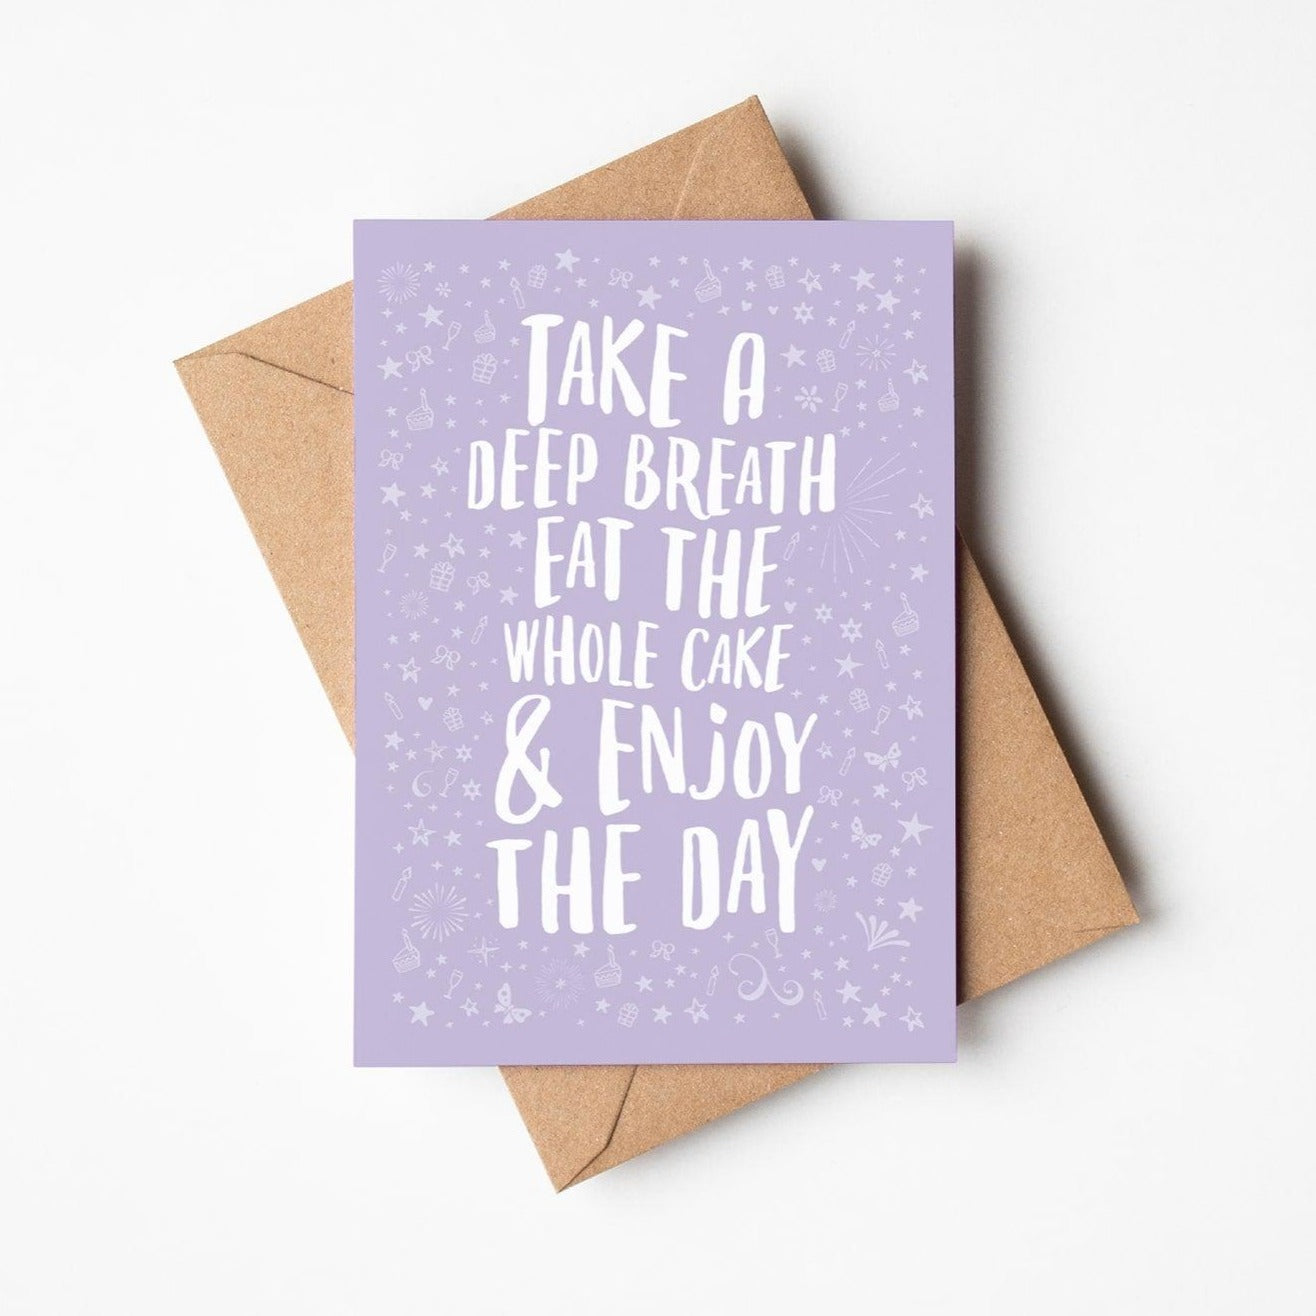 Take a deep breath, eat the whole cake and enjoy the day birthday card with kraft envelope